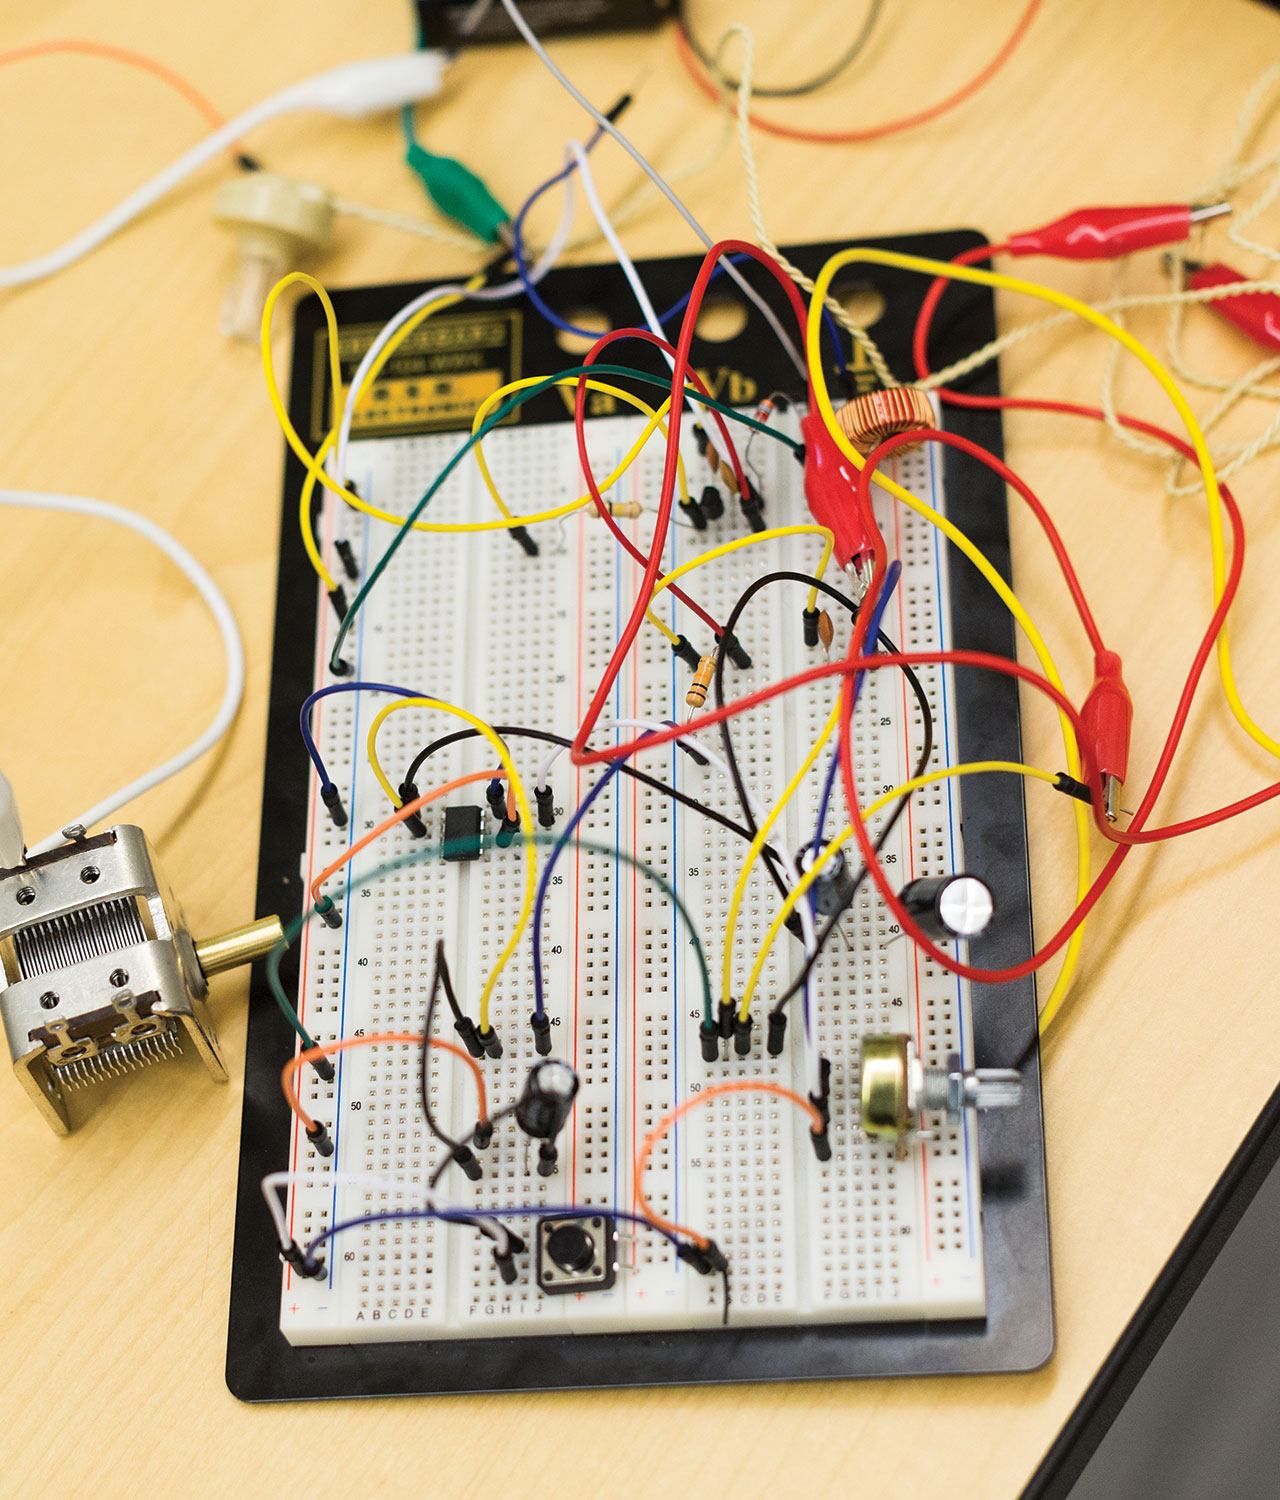 A prototyping boarding sitting on a table with many wires connected to it.